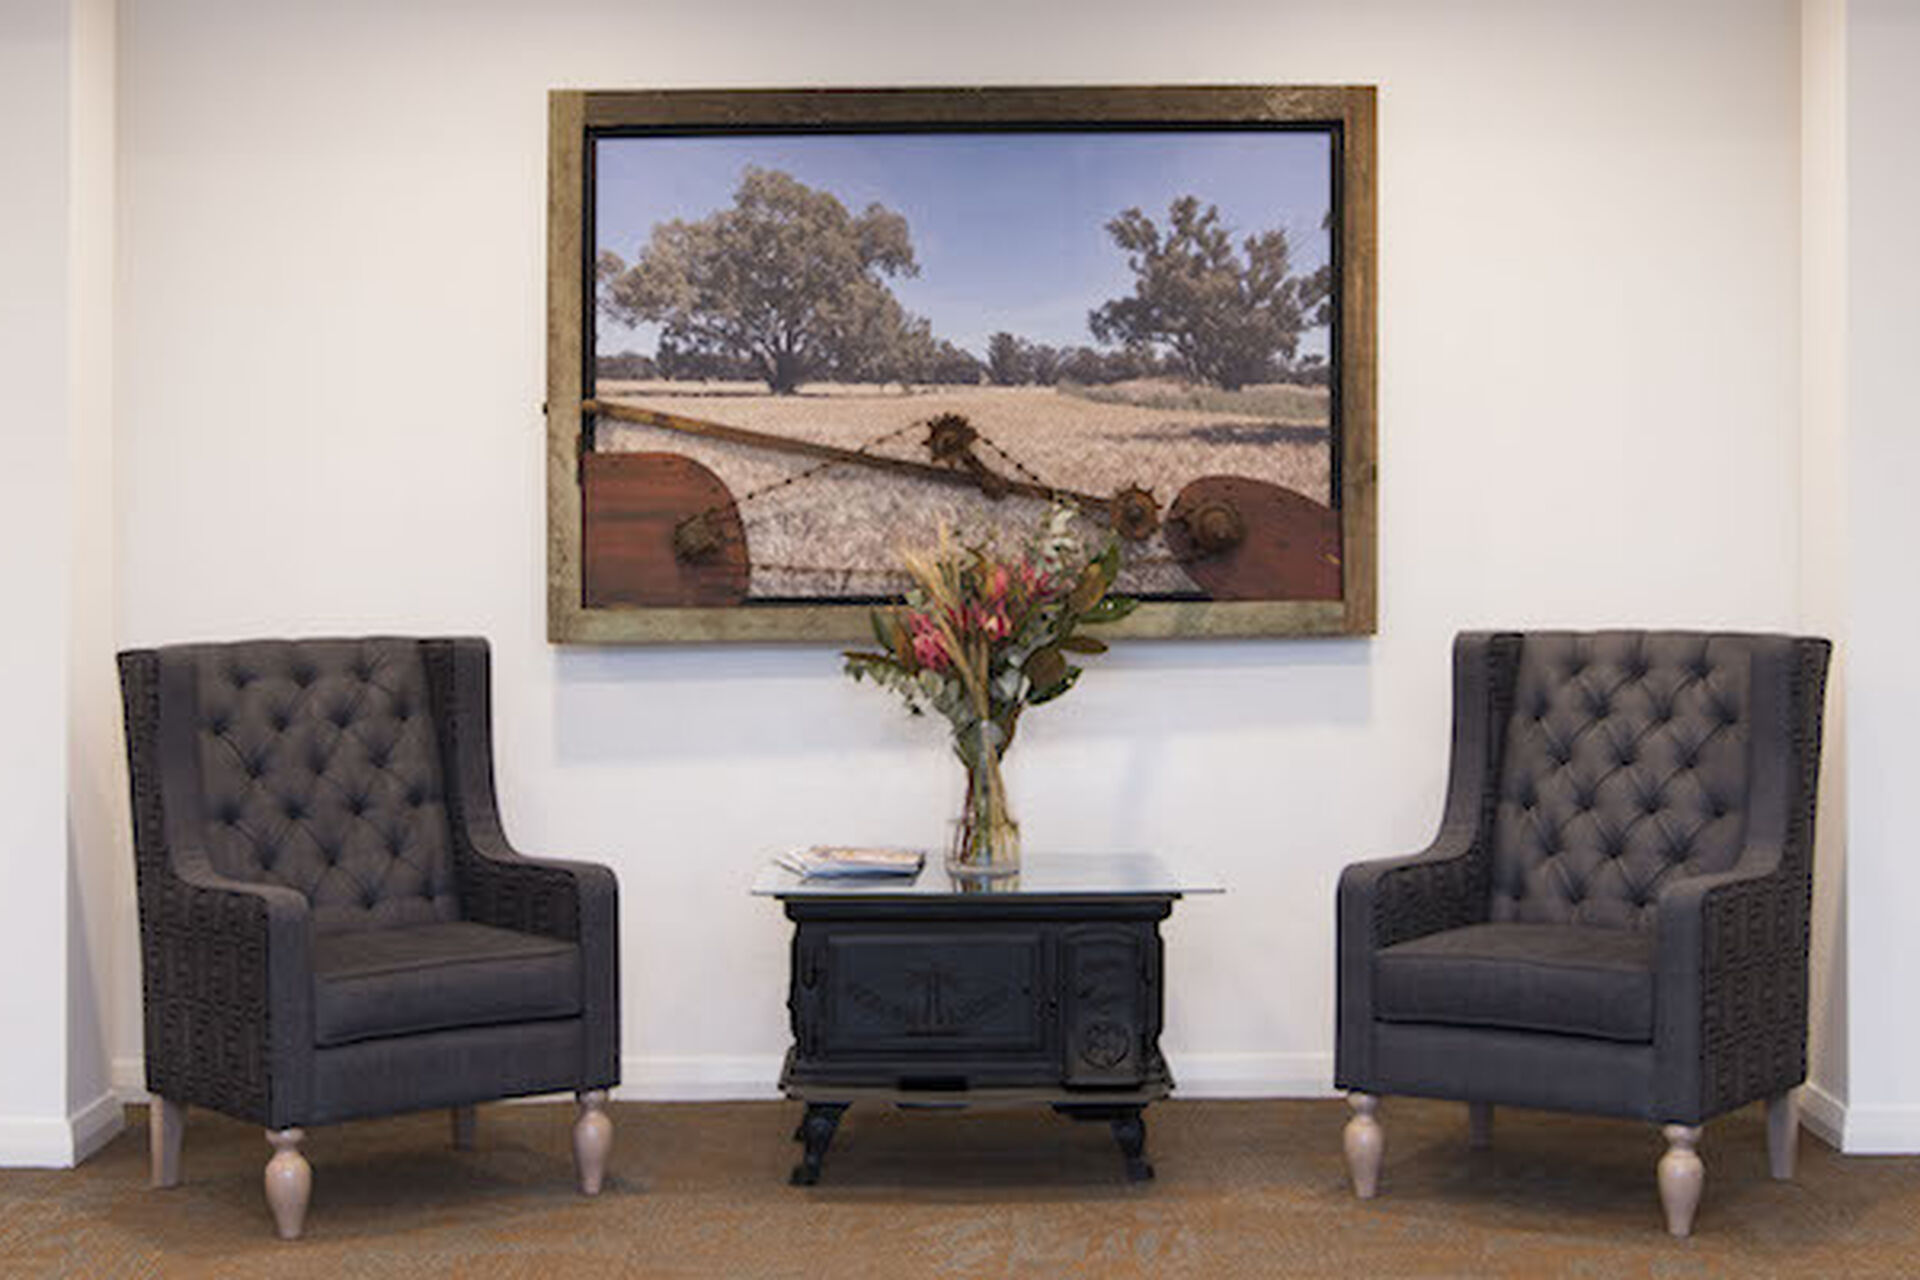 sitting area for nursing home residents at baptistcare kintyre lodge residential aged care home in dubbo